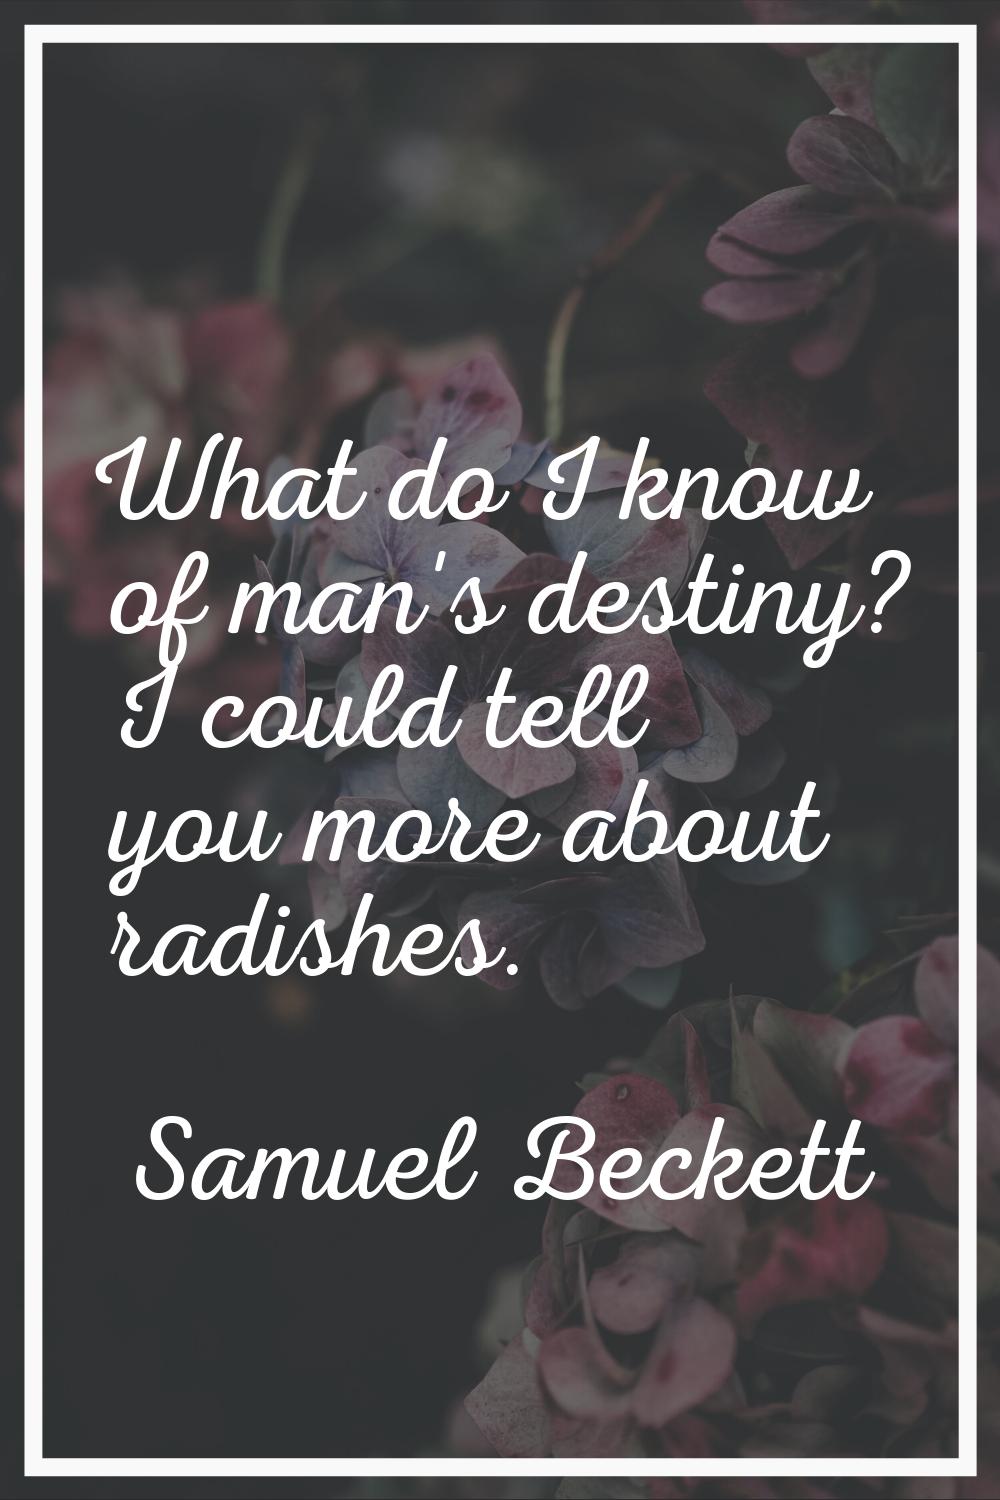 What do I know of man's destiny? I could tell you more about radishes.